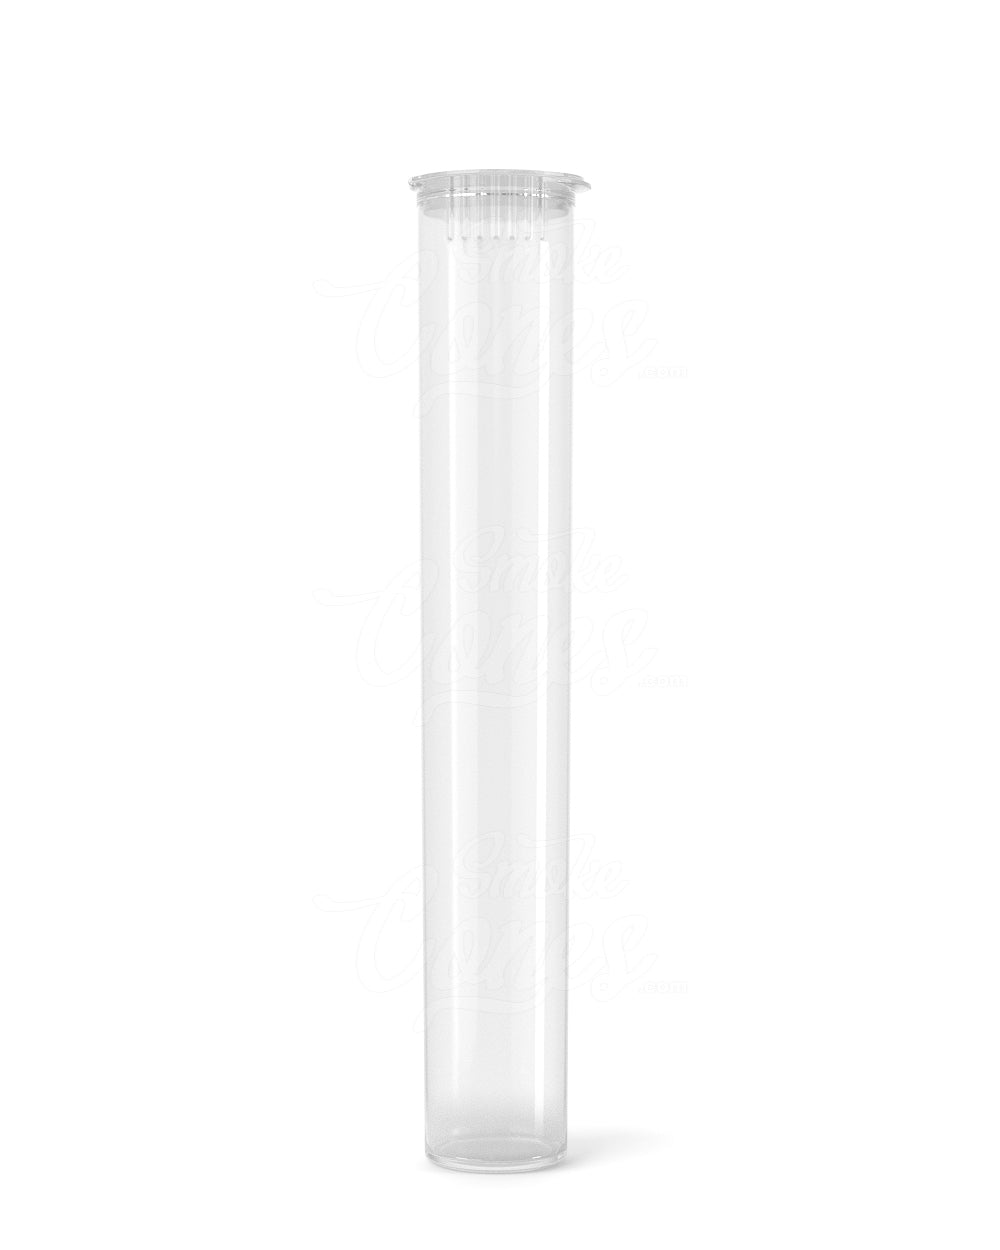 116mm Clear Opaque Child Resistant Pop Top Plastic Pre-Roll Tubes 100/Box Closed - 4